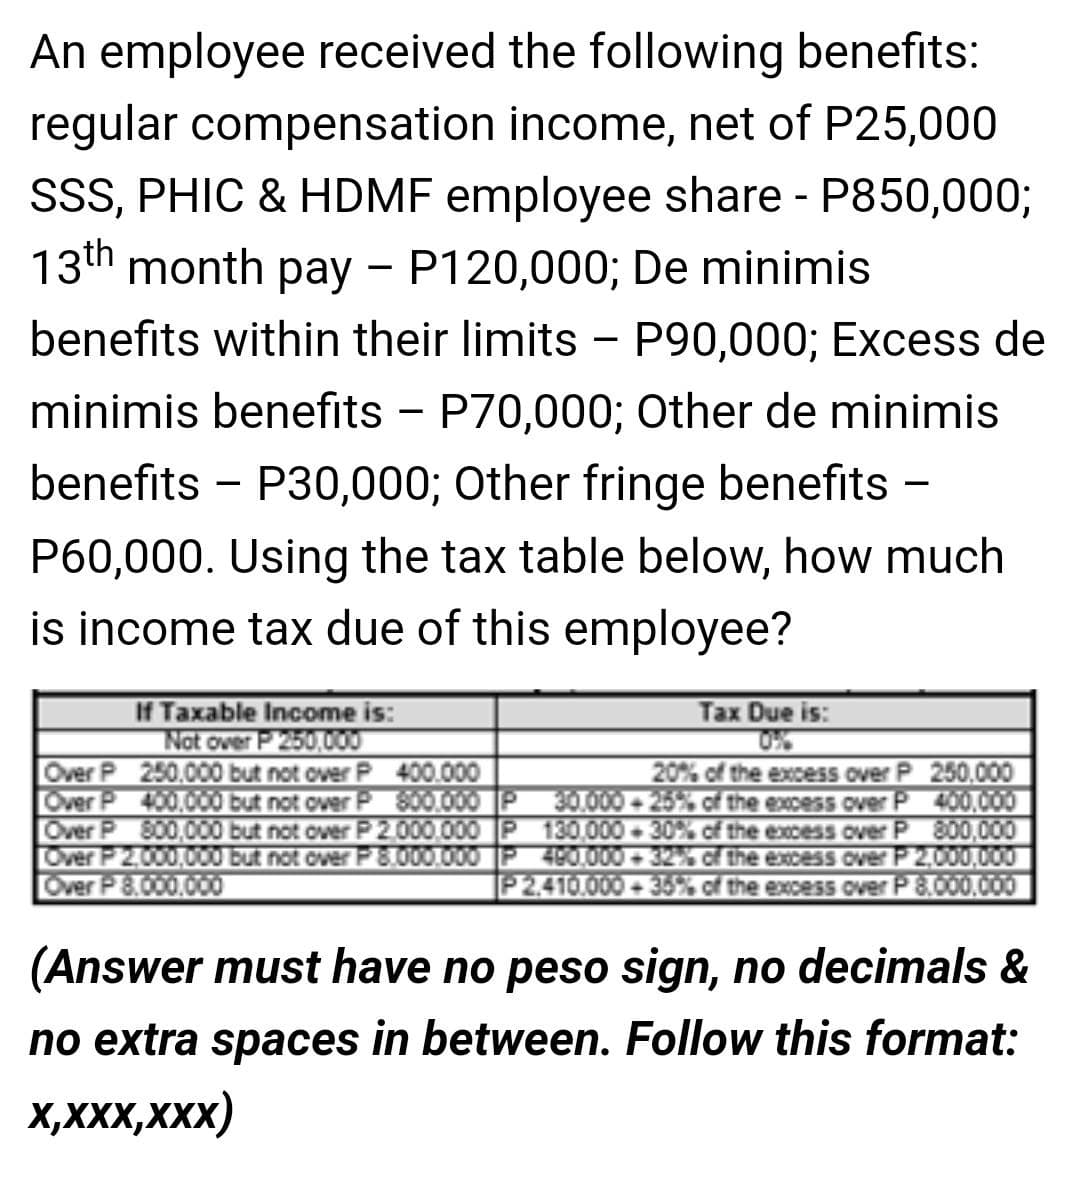 An employee received the following benefits:
regular compensation income, net of P25,000
SSS, PHIC & HDMF employee share - P850,000;
13th month pay - P120,000; De minimis
benefits within their limits - P90,000; Excess de
minimis benefits - P70,000; Other de minimis
benefits - P30,000; Other fringe benefits -
P60,000. Using the tax table below, how much
is income tax due of this employee?
Tax Due is:
If Taxable Income is:
Not over P 250,000
250,000 but not over P
400,000 but not over P
Over P
Over P
400.000
20% of the excess over P 250,000
800.000 P 30.000+25% of the excess over P 400.000
Over P 800,000 but not over P 2,000,000 P 130,000+30% of the excess over P 800,000
Over P 2,000,000 but not over P 8.000.000 P 480,000 + 32% of the excess over P 2,000,000
Over P 8,000,000
|P 2.410.000 + 35% of the excess over P 8,000,000
(Answer must have no peso sign, no decimals &
no extra spaces in between. Follow this format:
X,XXX,XXX)